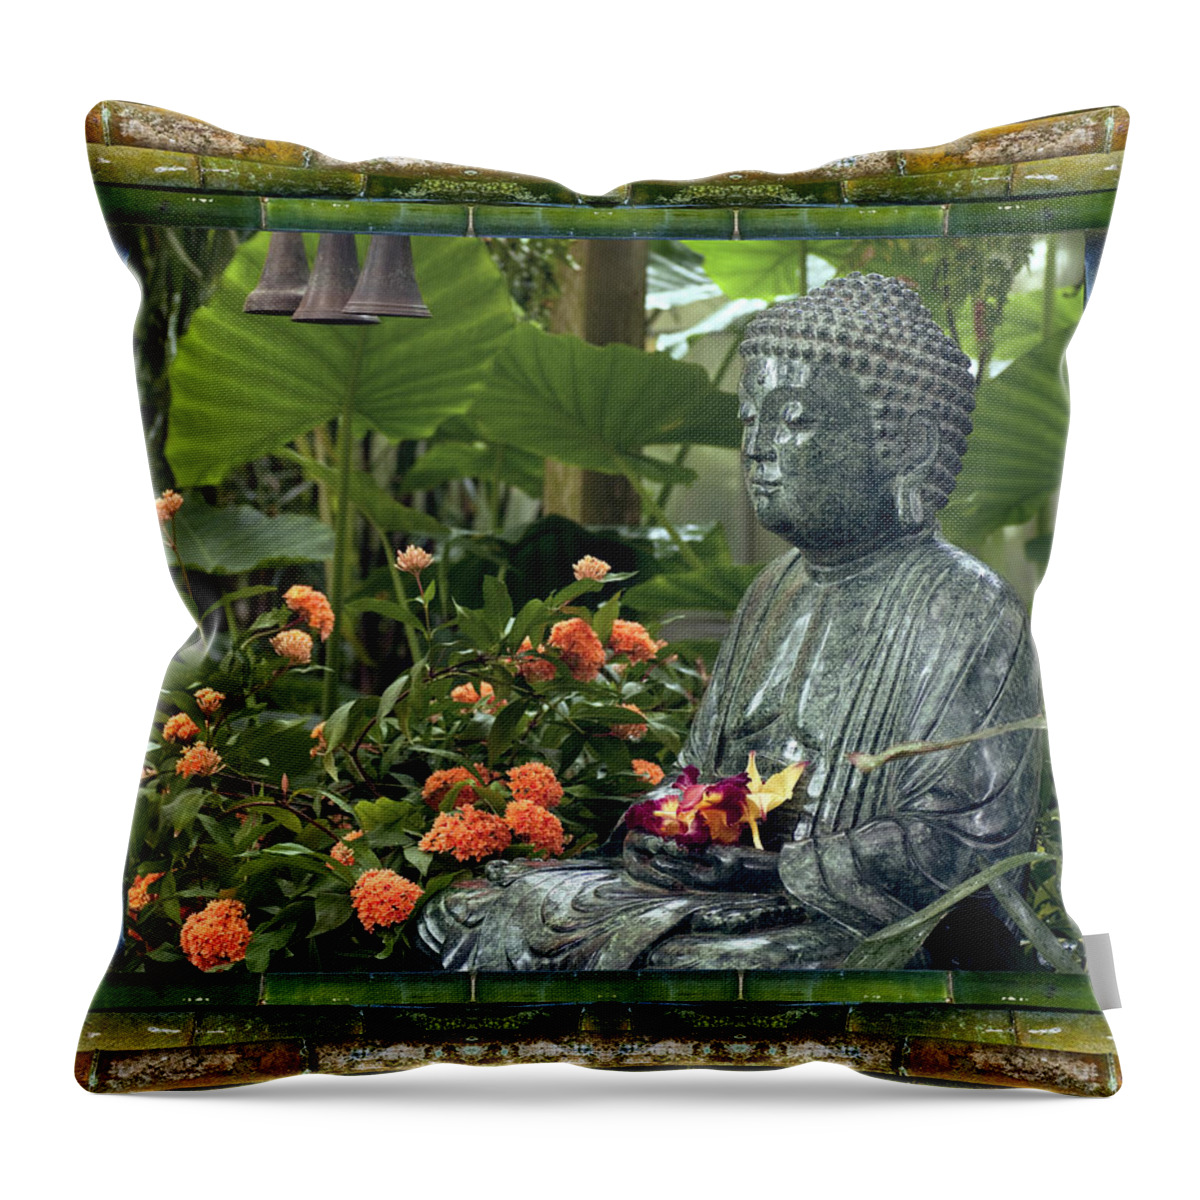 Mandalas Throw Pillow featuring the photograph In Repose by Bell And Todd